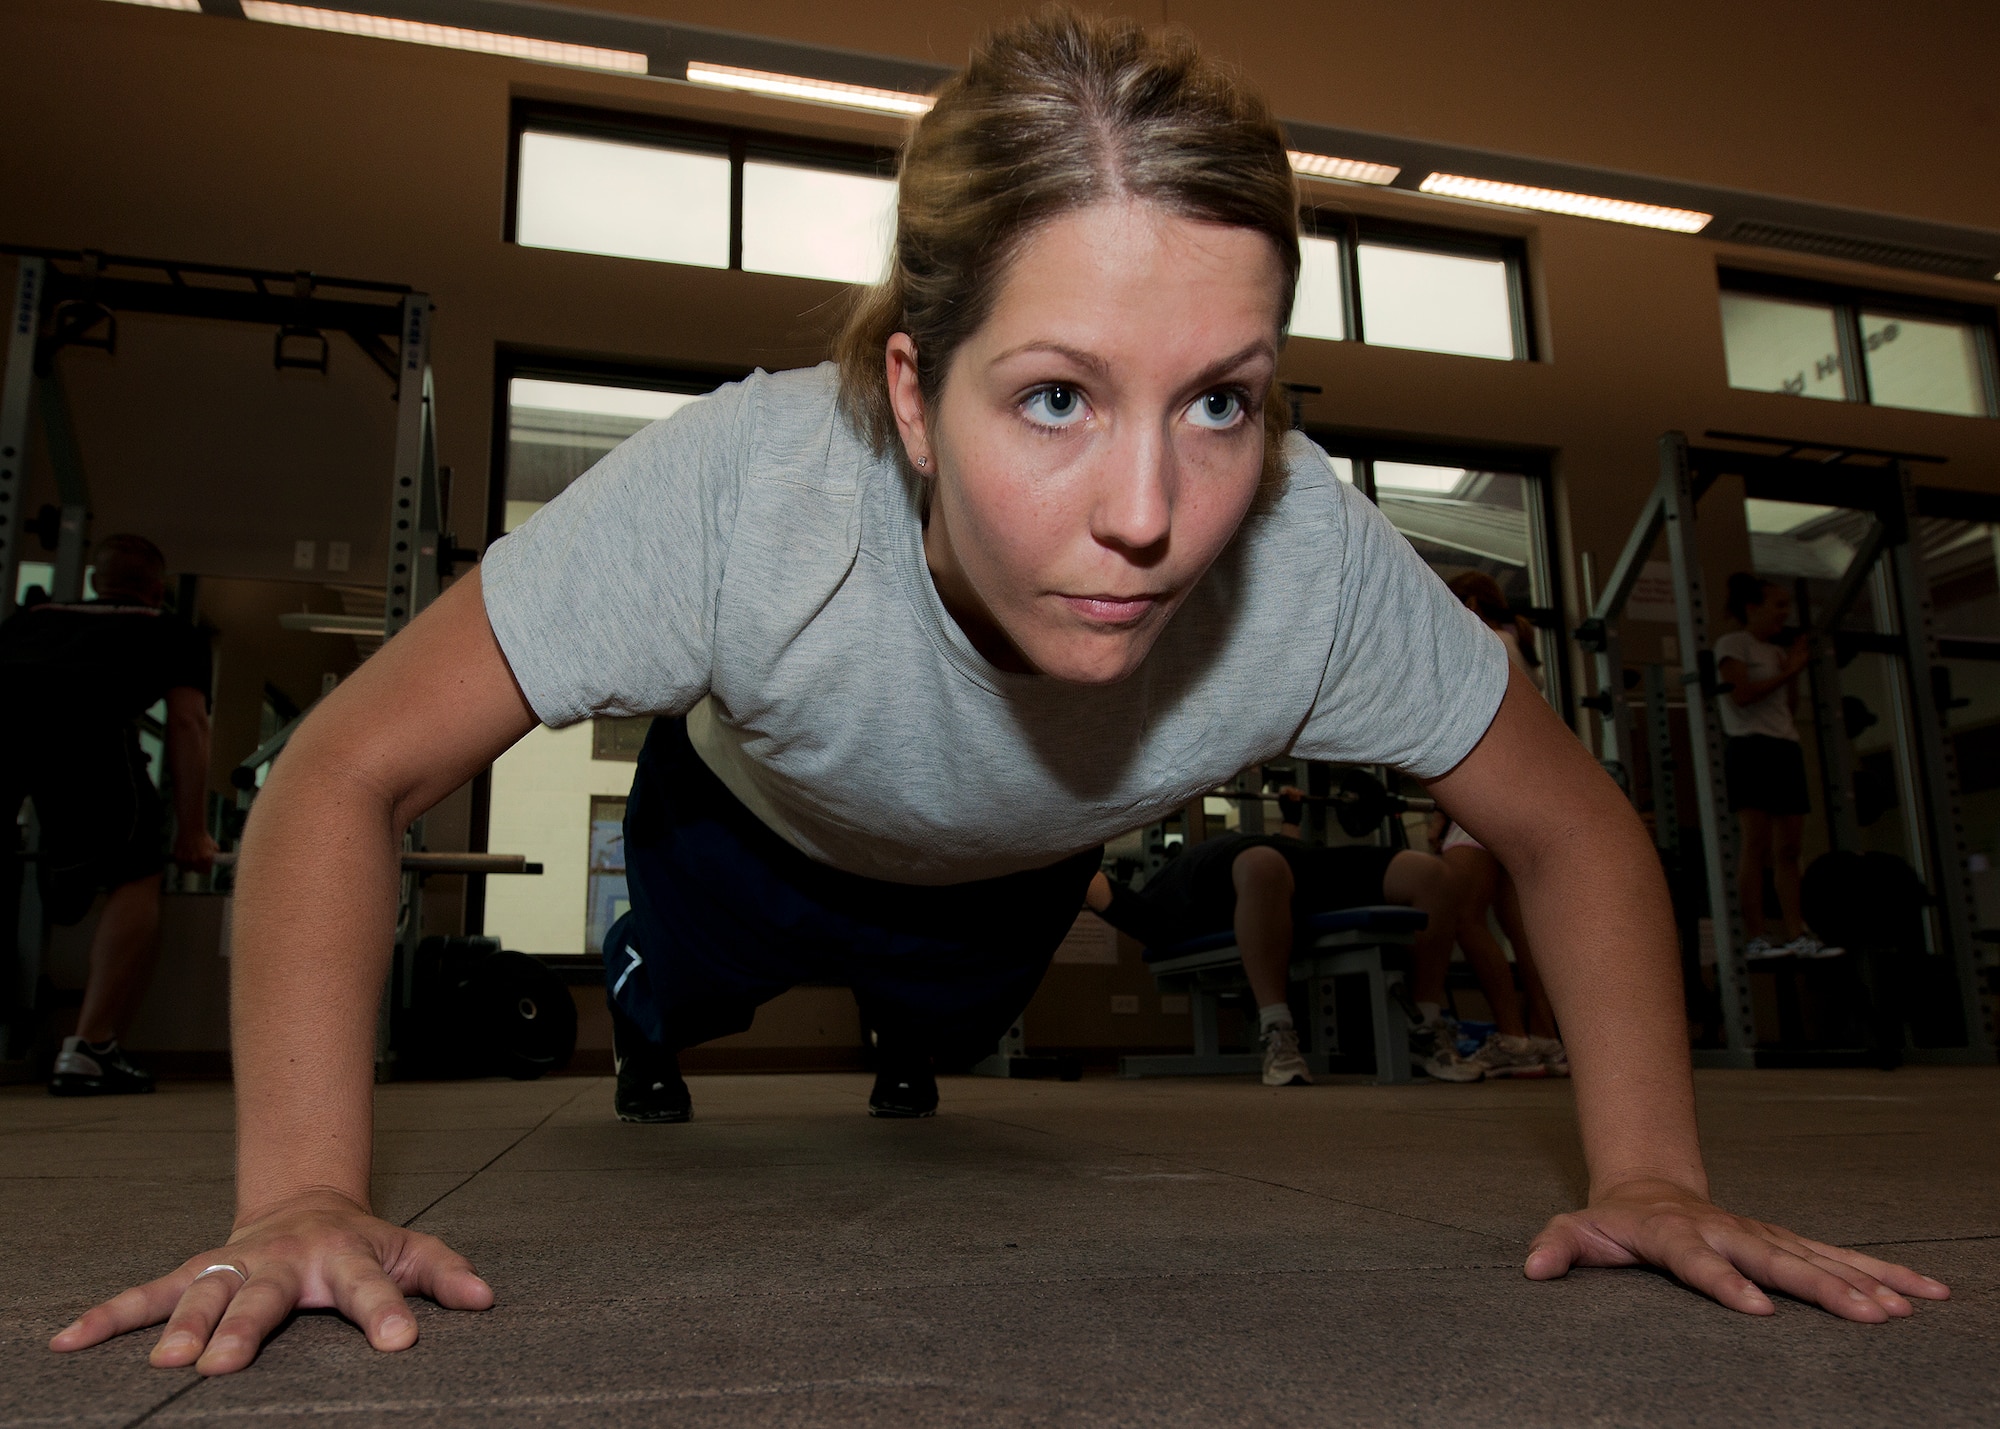 Senior Airman Karla Burns, of the 96th Air Base Wing staff, uses the proper form while practicing her push-ups during her morning workout routine May 3 at Eglin Air Force Base, Fla.  Burns struggled to complete the required amount of push-ups during her recent physical training tests.  With the help of the fitness center staff, she began a workout plan that allowed her to excel and pass her test.  (U.S. Air Force photo/Samuel King Jr.)